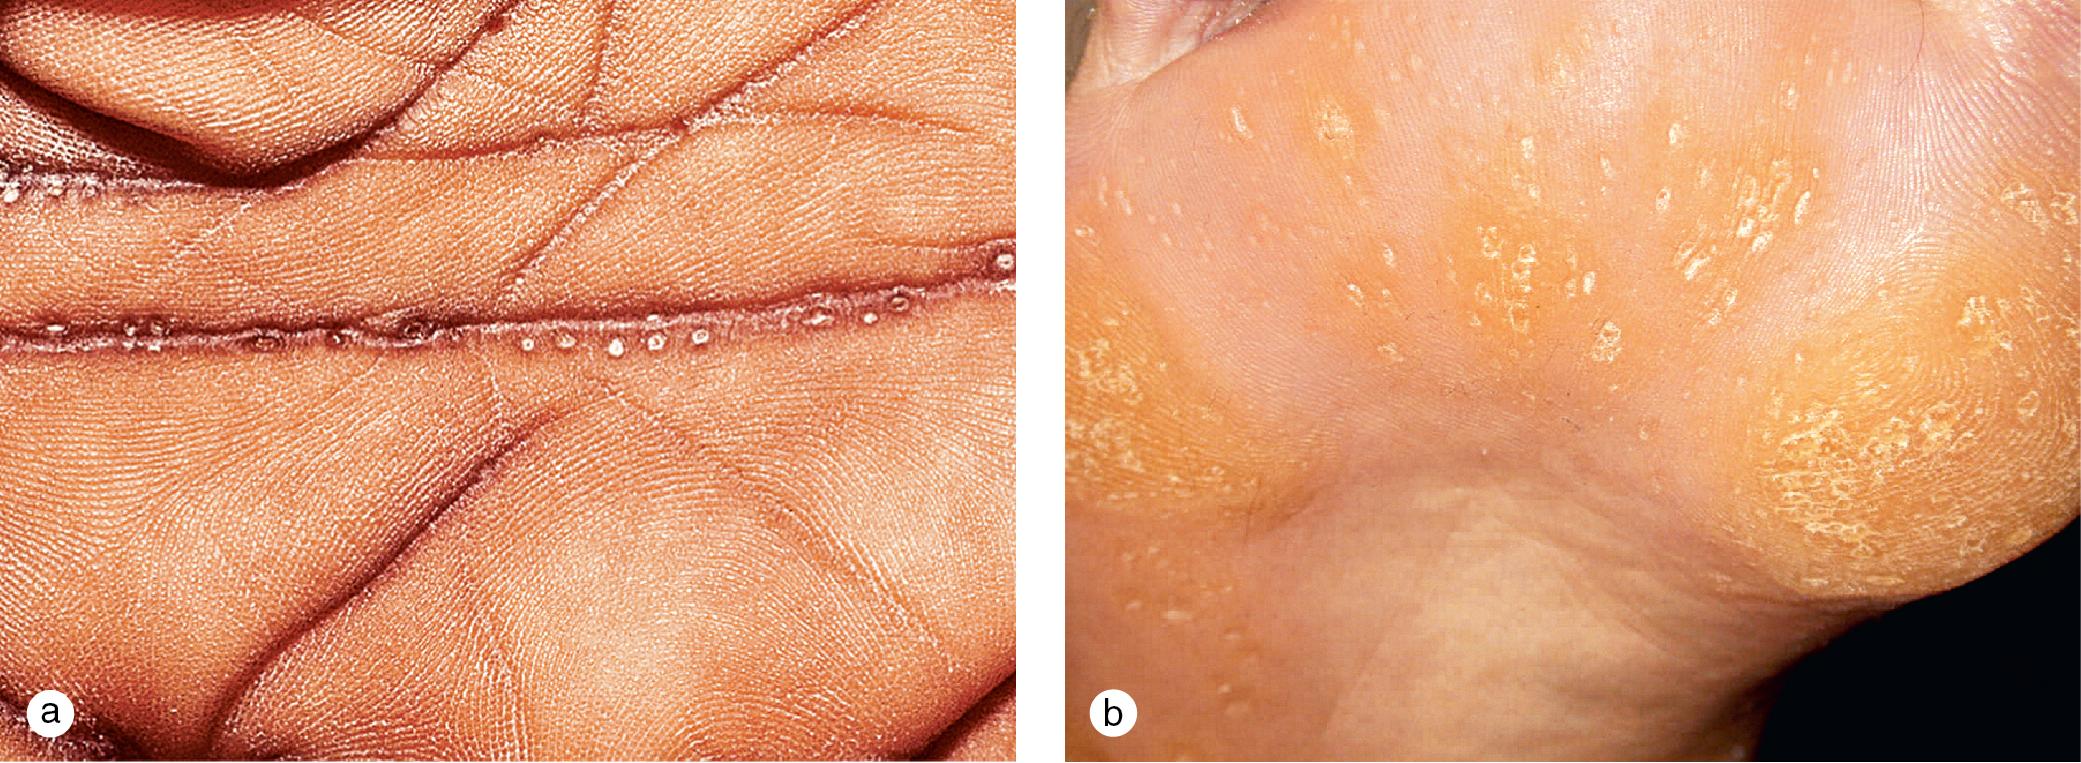 Fig. 3.12, Focal keratoderma. Asymptomatic hyperkeratotic papules and pits (a) developed on the hand creases of an African American teenager. Painful punctuate papules and pits began in adolescence on the palms and (b) soles of this young man similar to lesions on his father, uncle, grandfather, and several siblings.